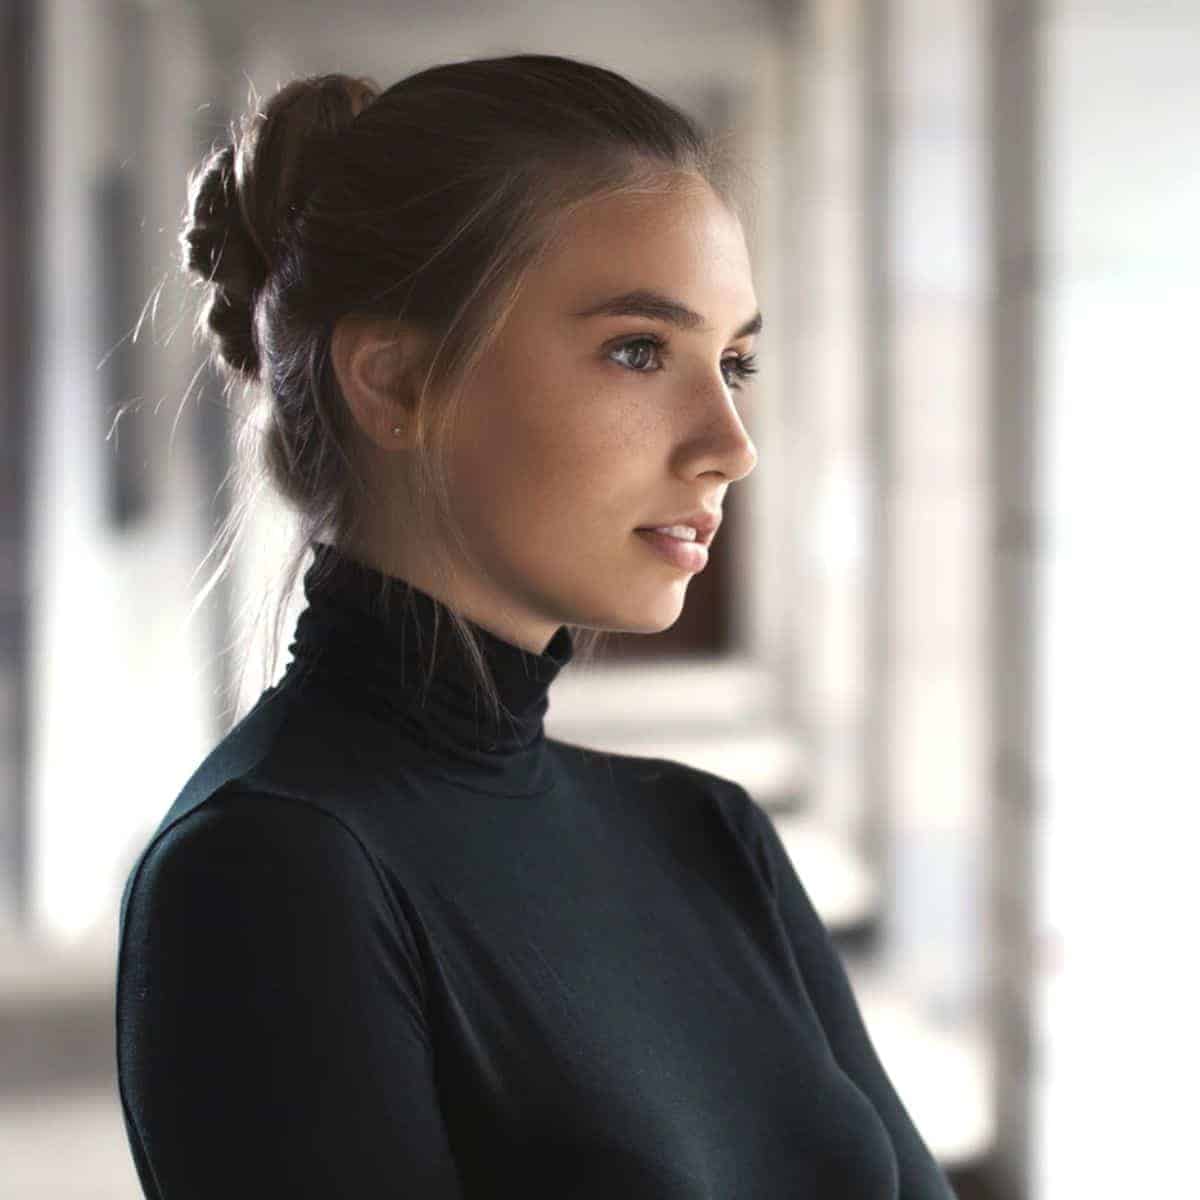 Person wearing a turtleneck and facing the side.